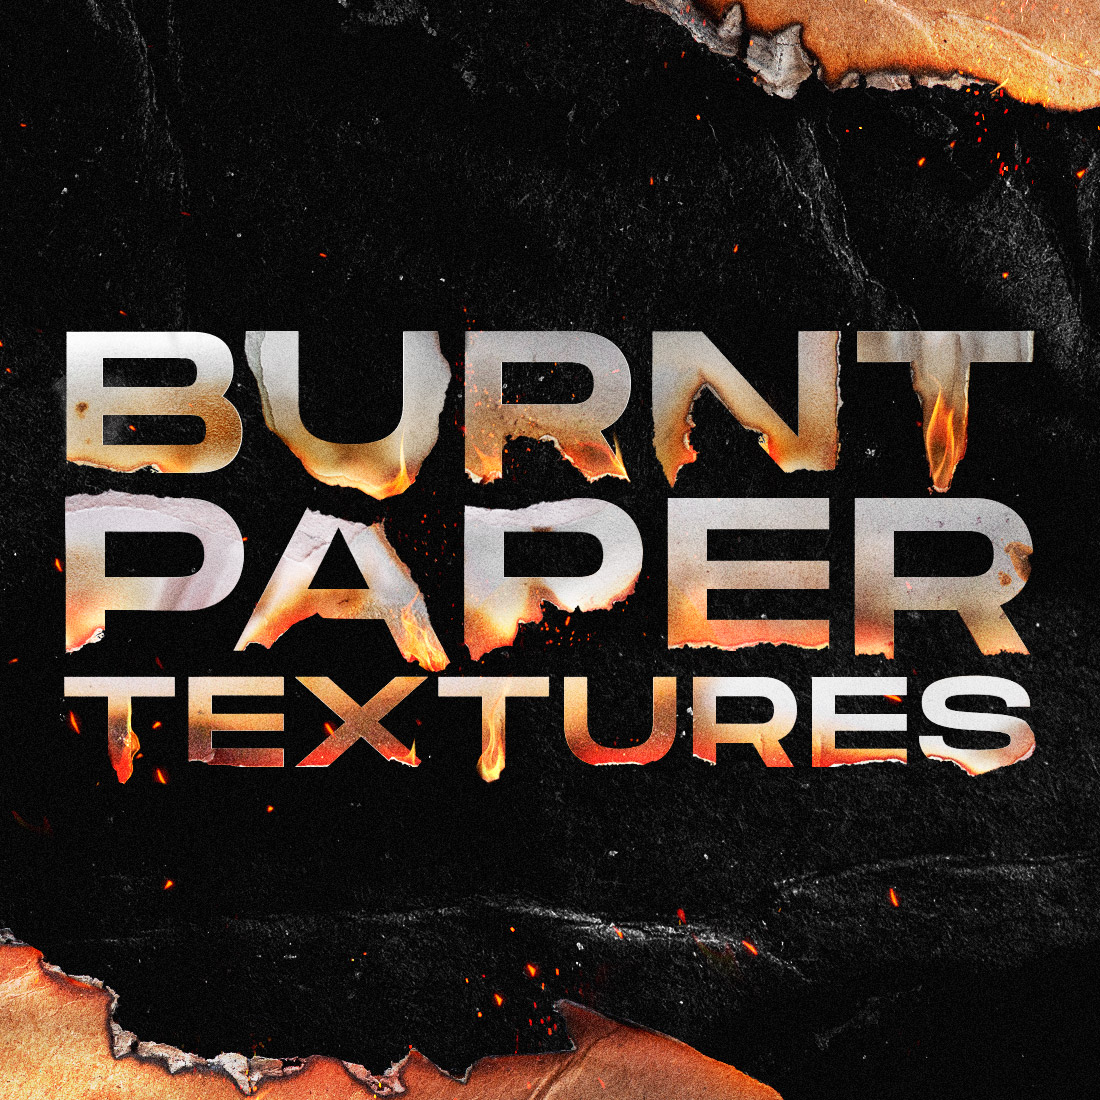 Torn and Burned Paper Textures cover image.